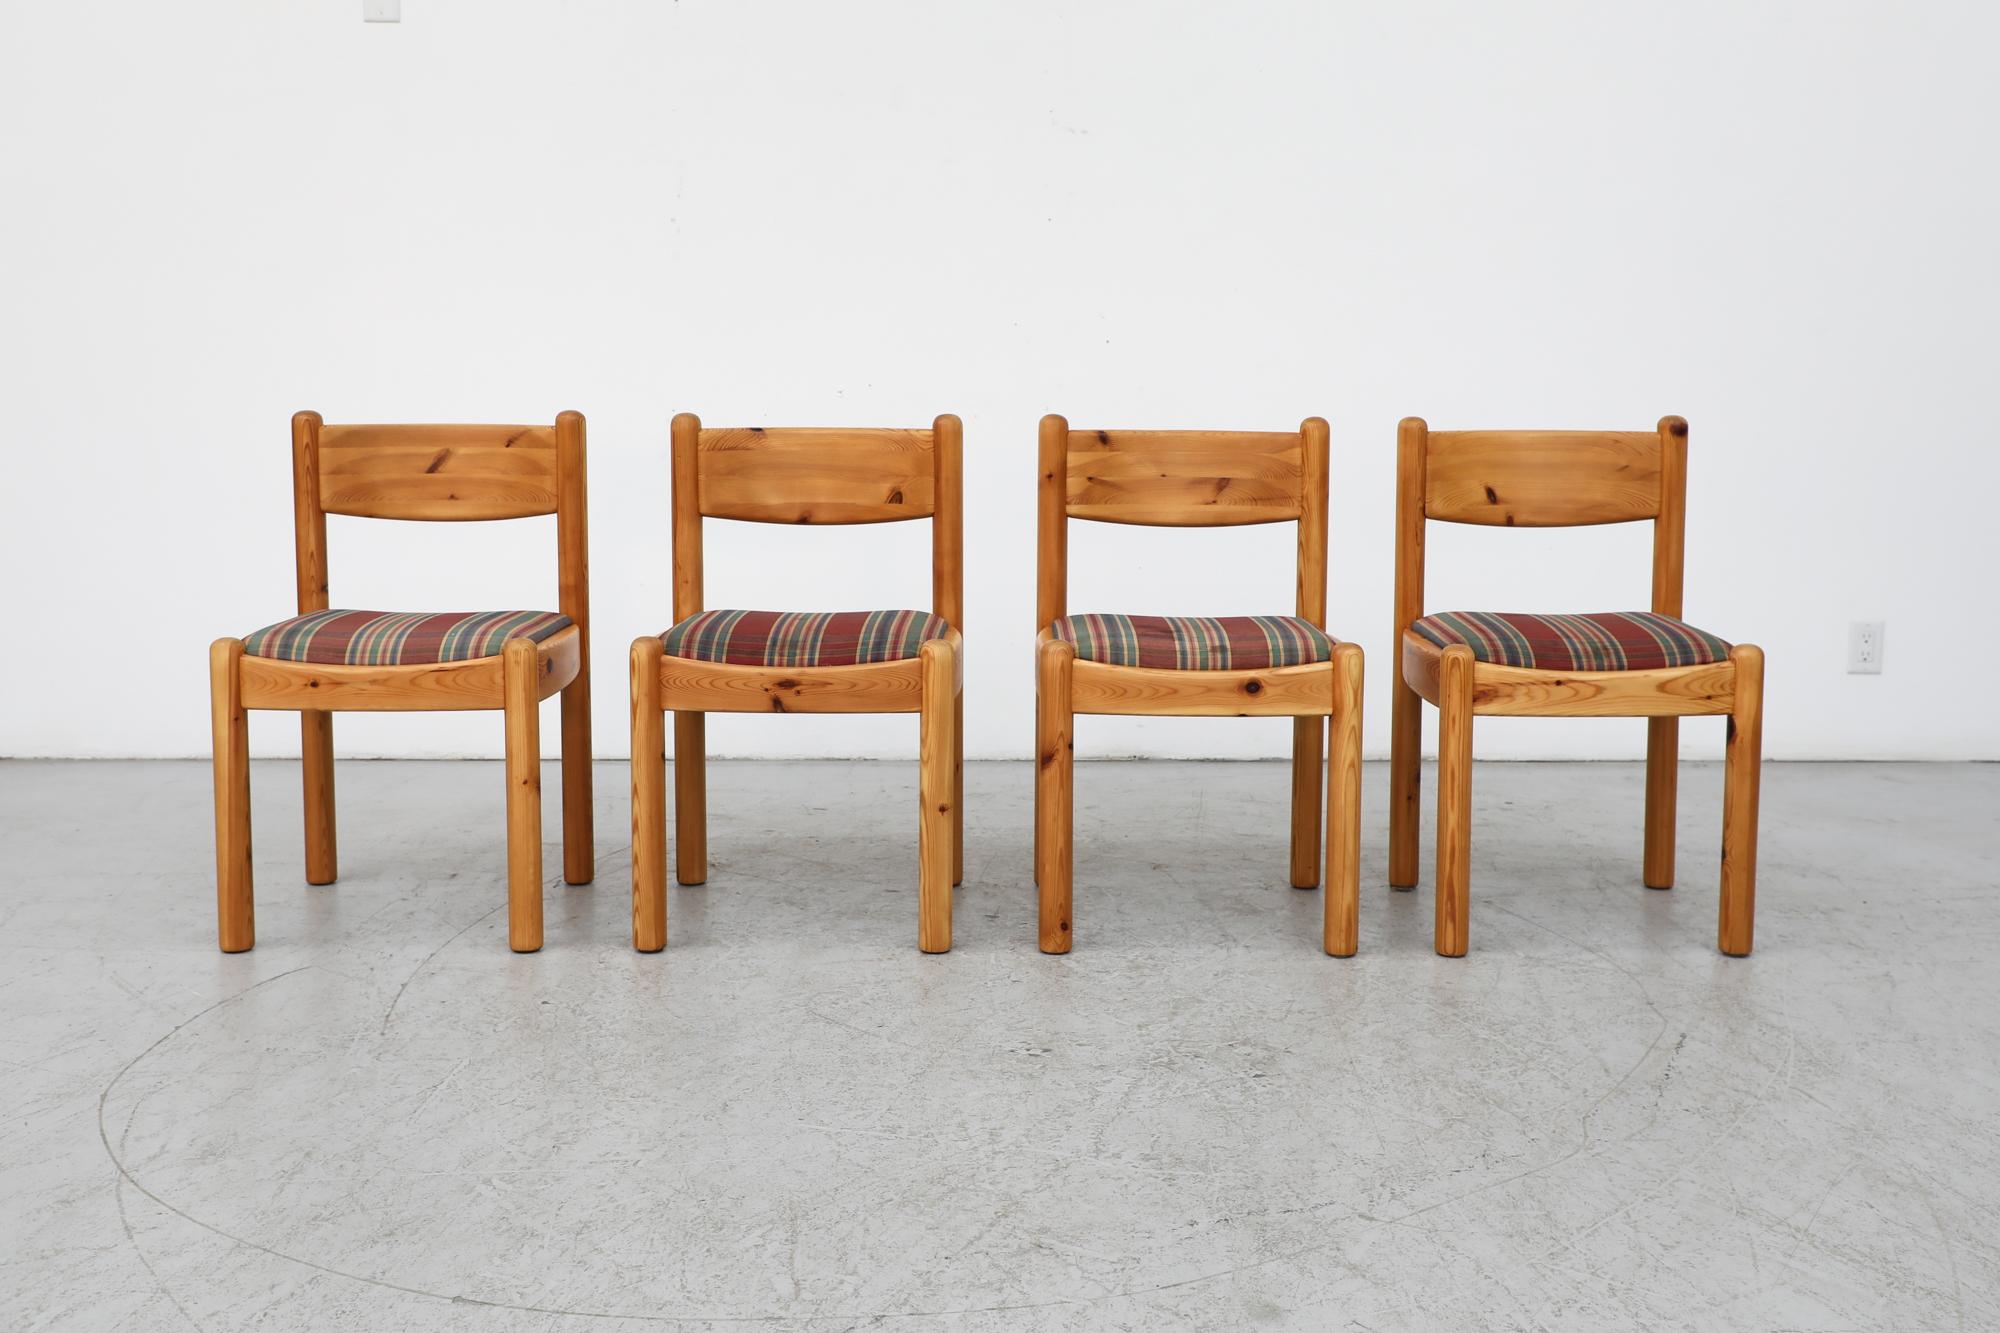 Set of 4, mid century, 1960s Ate van Apeldoorn style Pine dining chairs with handsome, plaid upholstered seats. Made in The Netherlands. These chairs are in original condition with some visible wear and scratching consistent with their age and use.